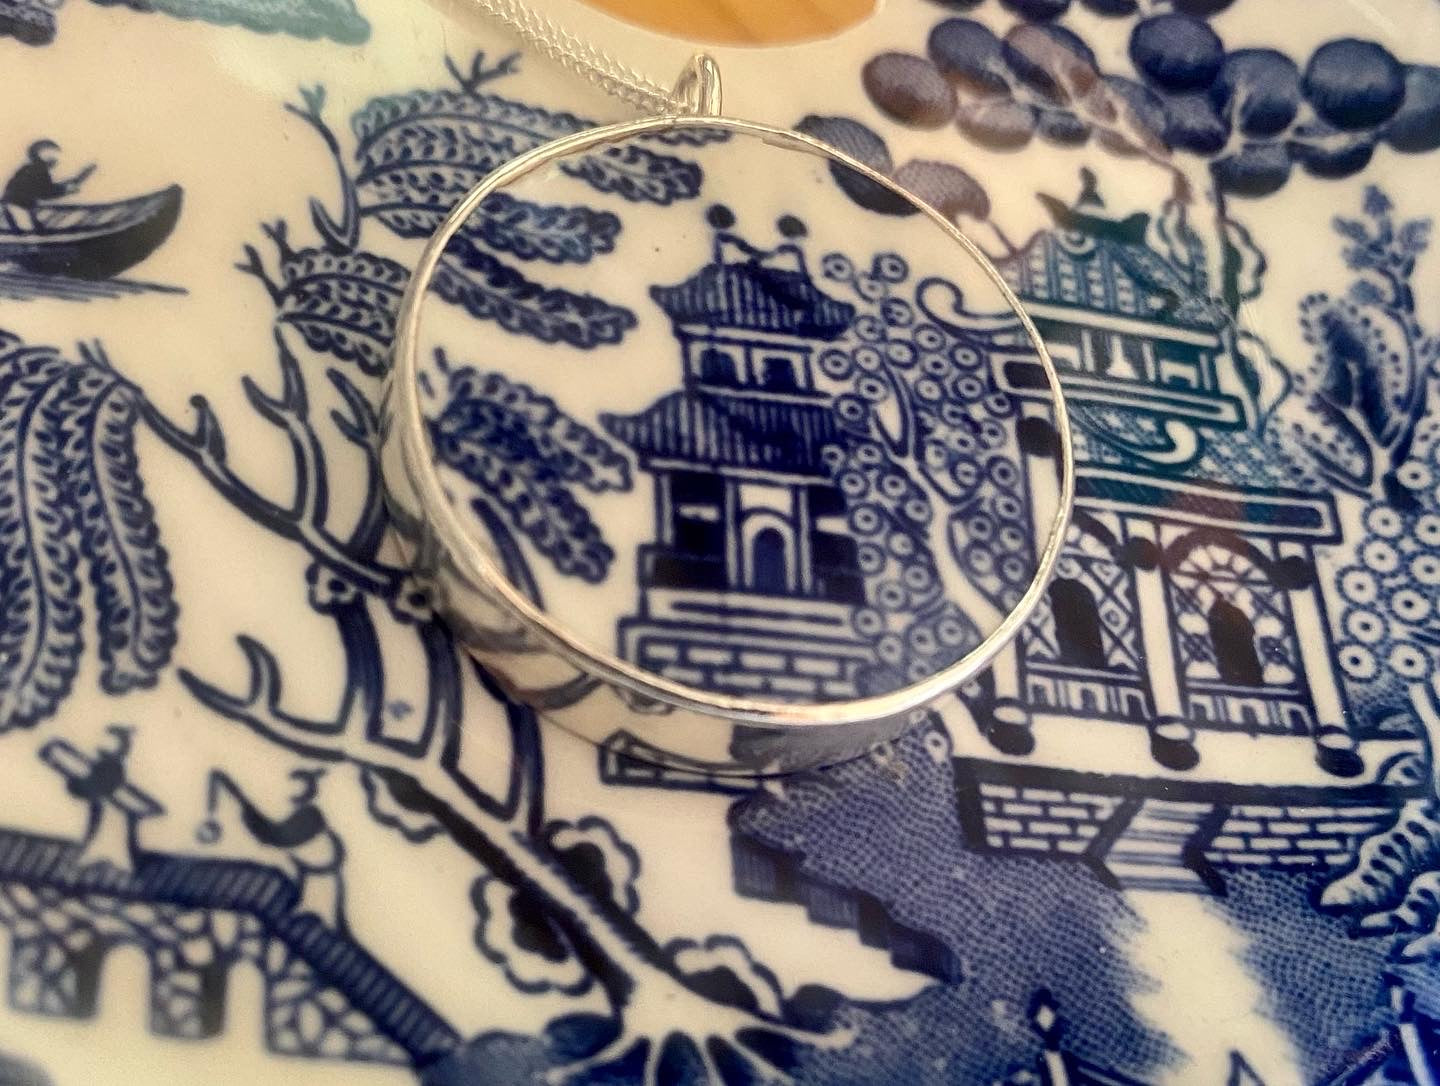 Willow pattern silver pendant